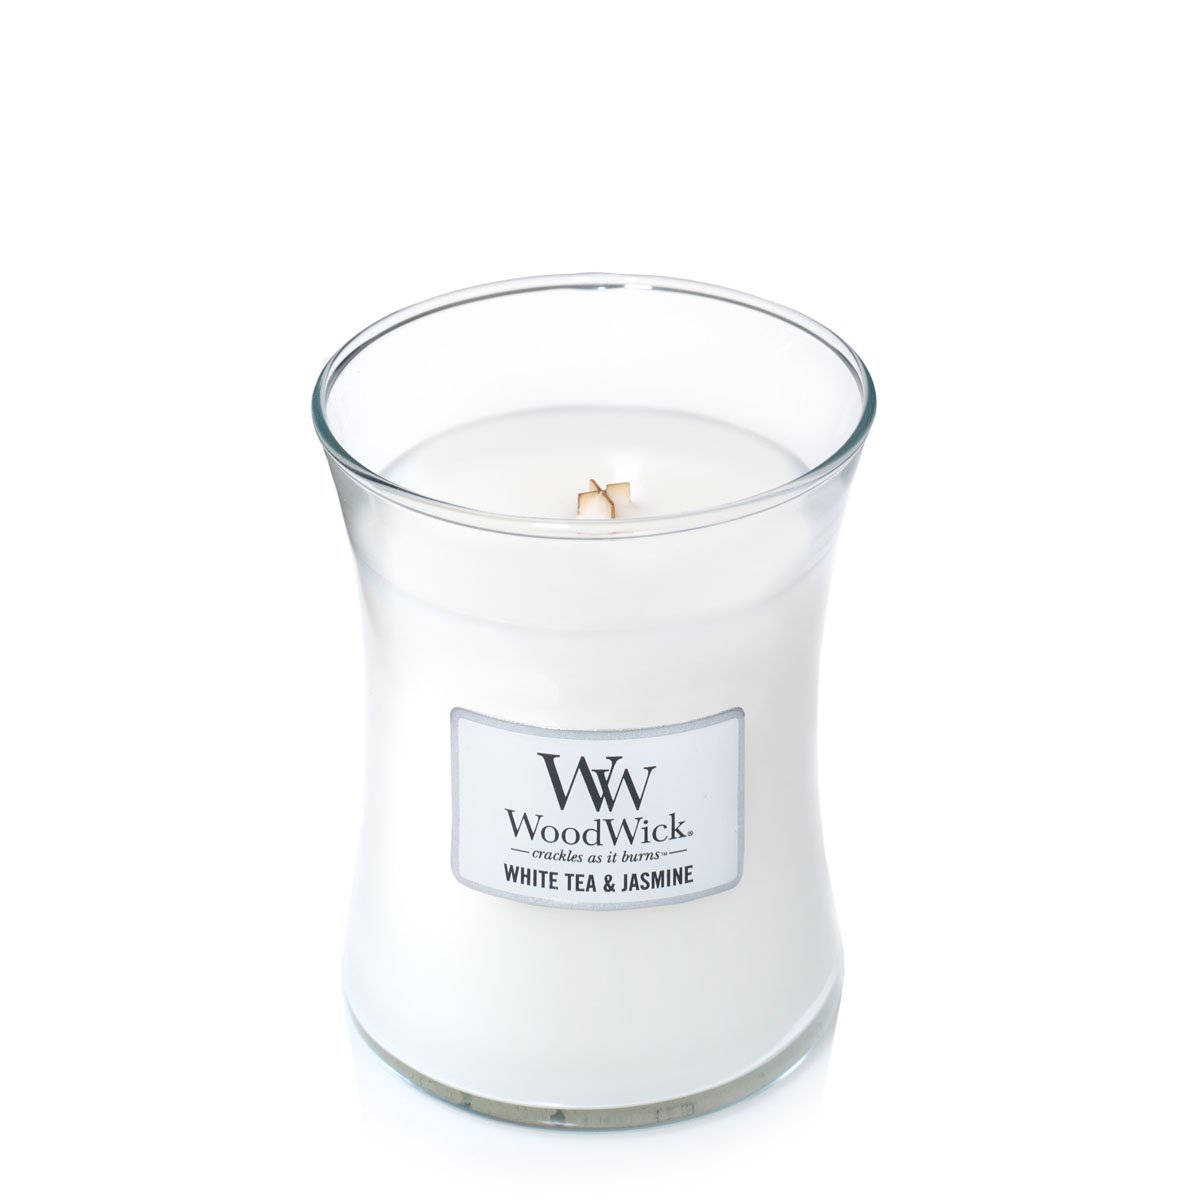 Yankee Candle Woodwick White Tea And Jasmine Medium Hourglass Candle, Candles & Home Fragrance, Household